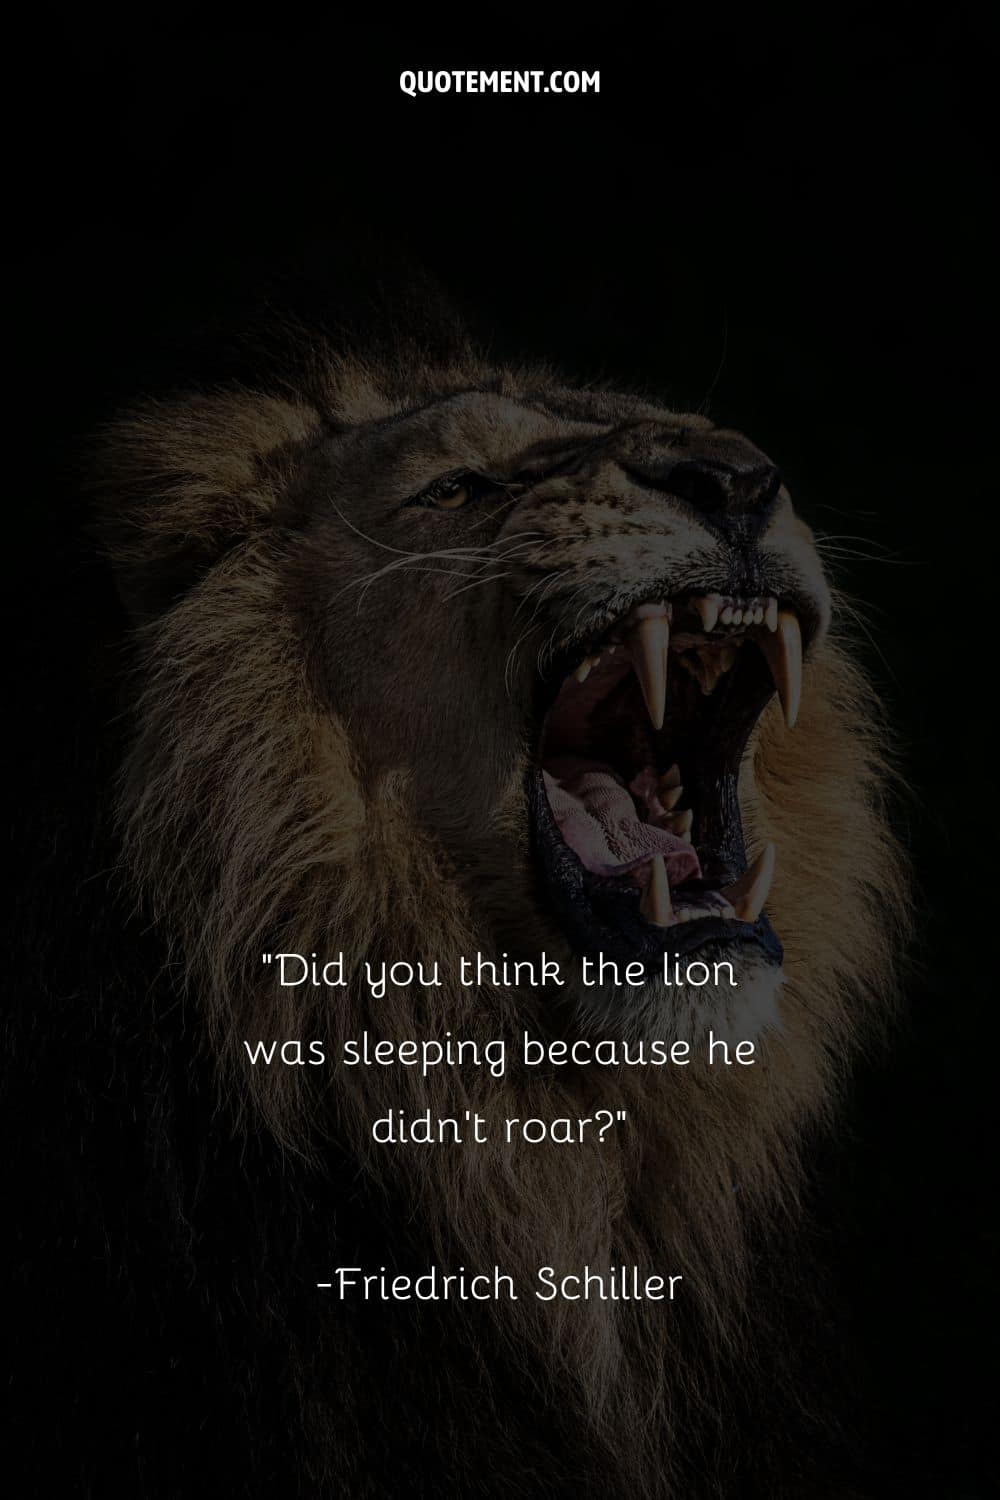 Did you think the lion was sleeping because he didn't roar